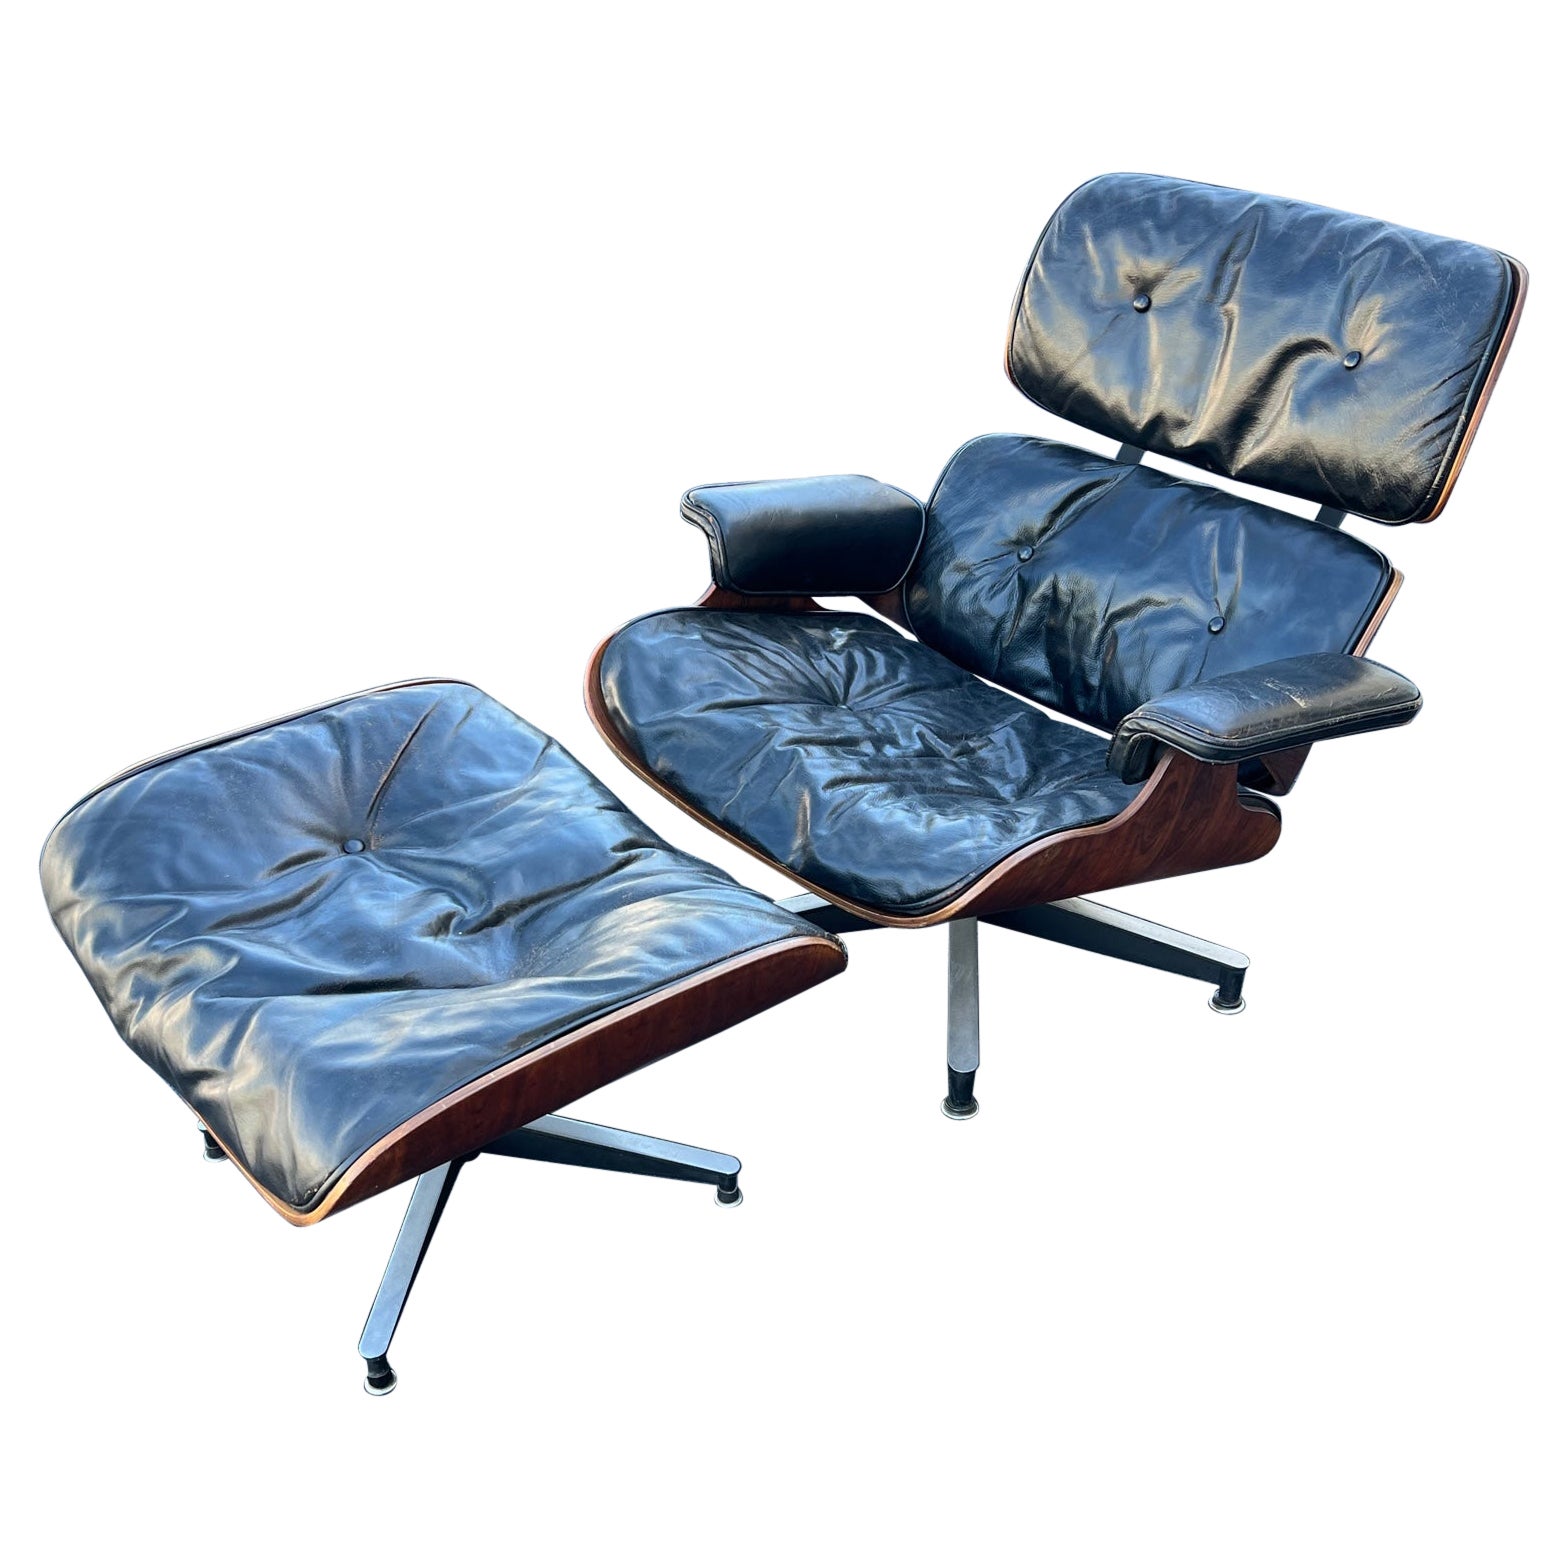 Original Charles Eames Herman Miller Lounge Chair and Ottoman 1959